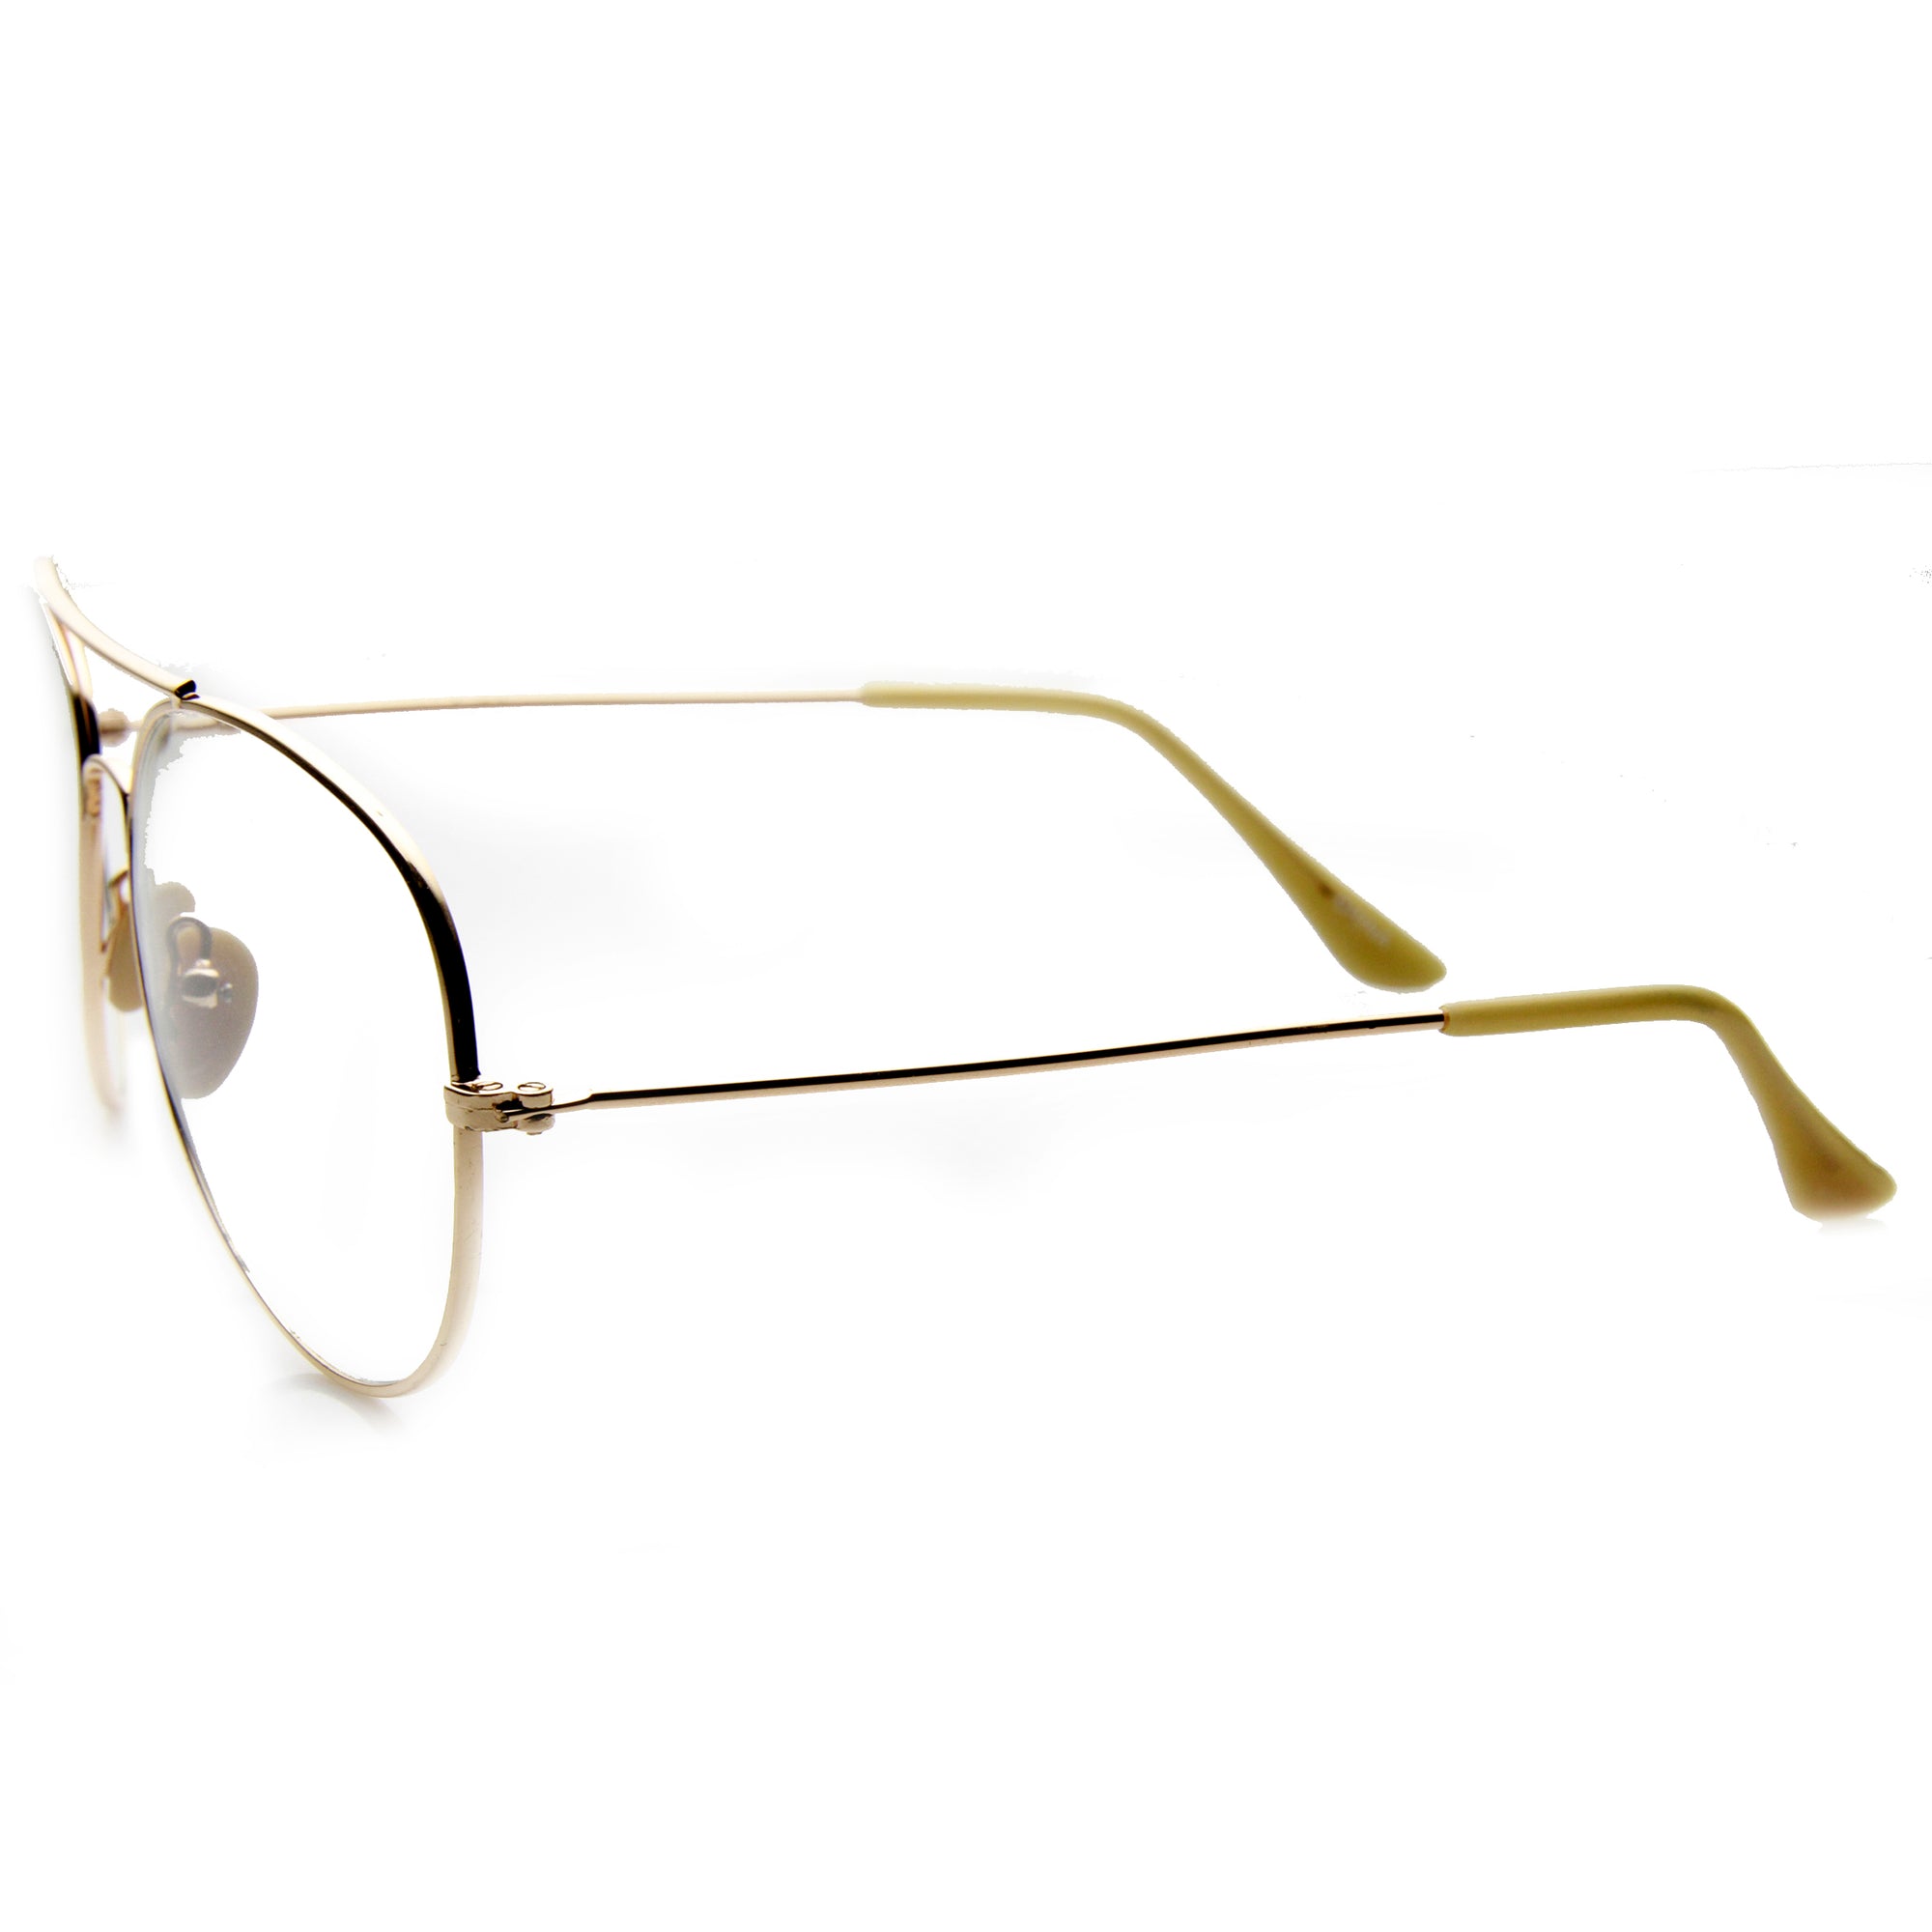 Aviator Sunglasses with Wire Frames